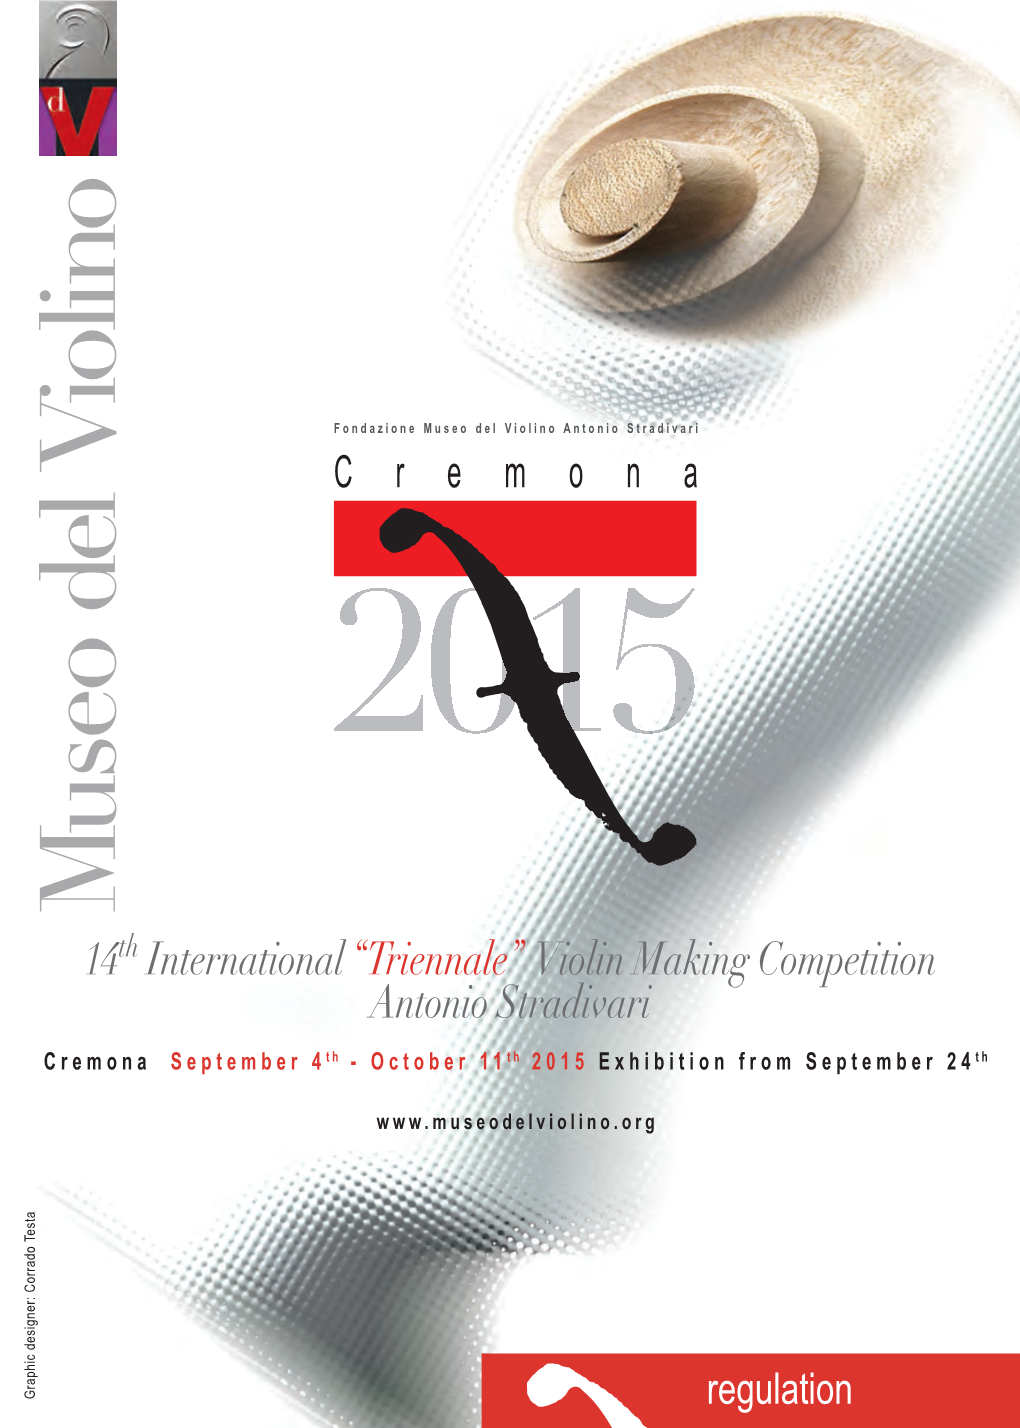 “Triennale” Violin Making Competition Antonio Stradivari Cremona September 4Th - October 11Th 2015 Exhibition from September 24Th